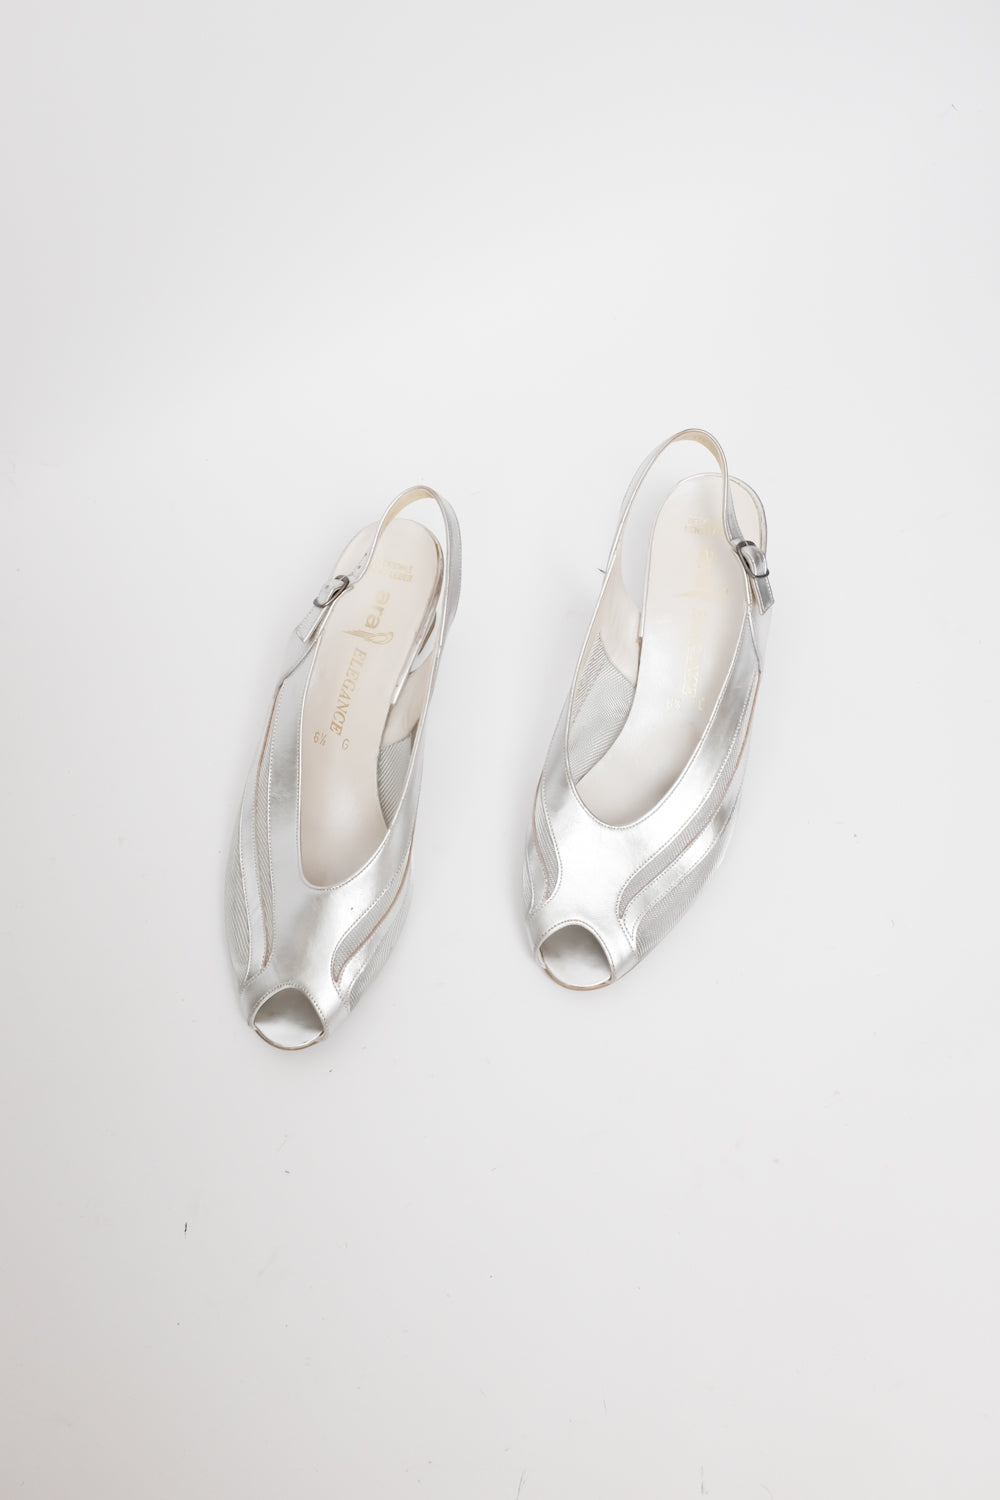 LUCID SILVER LEATHER 39 40 SANDALS